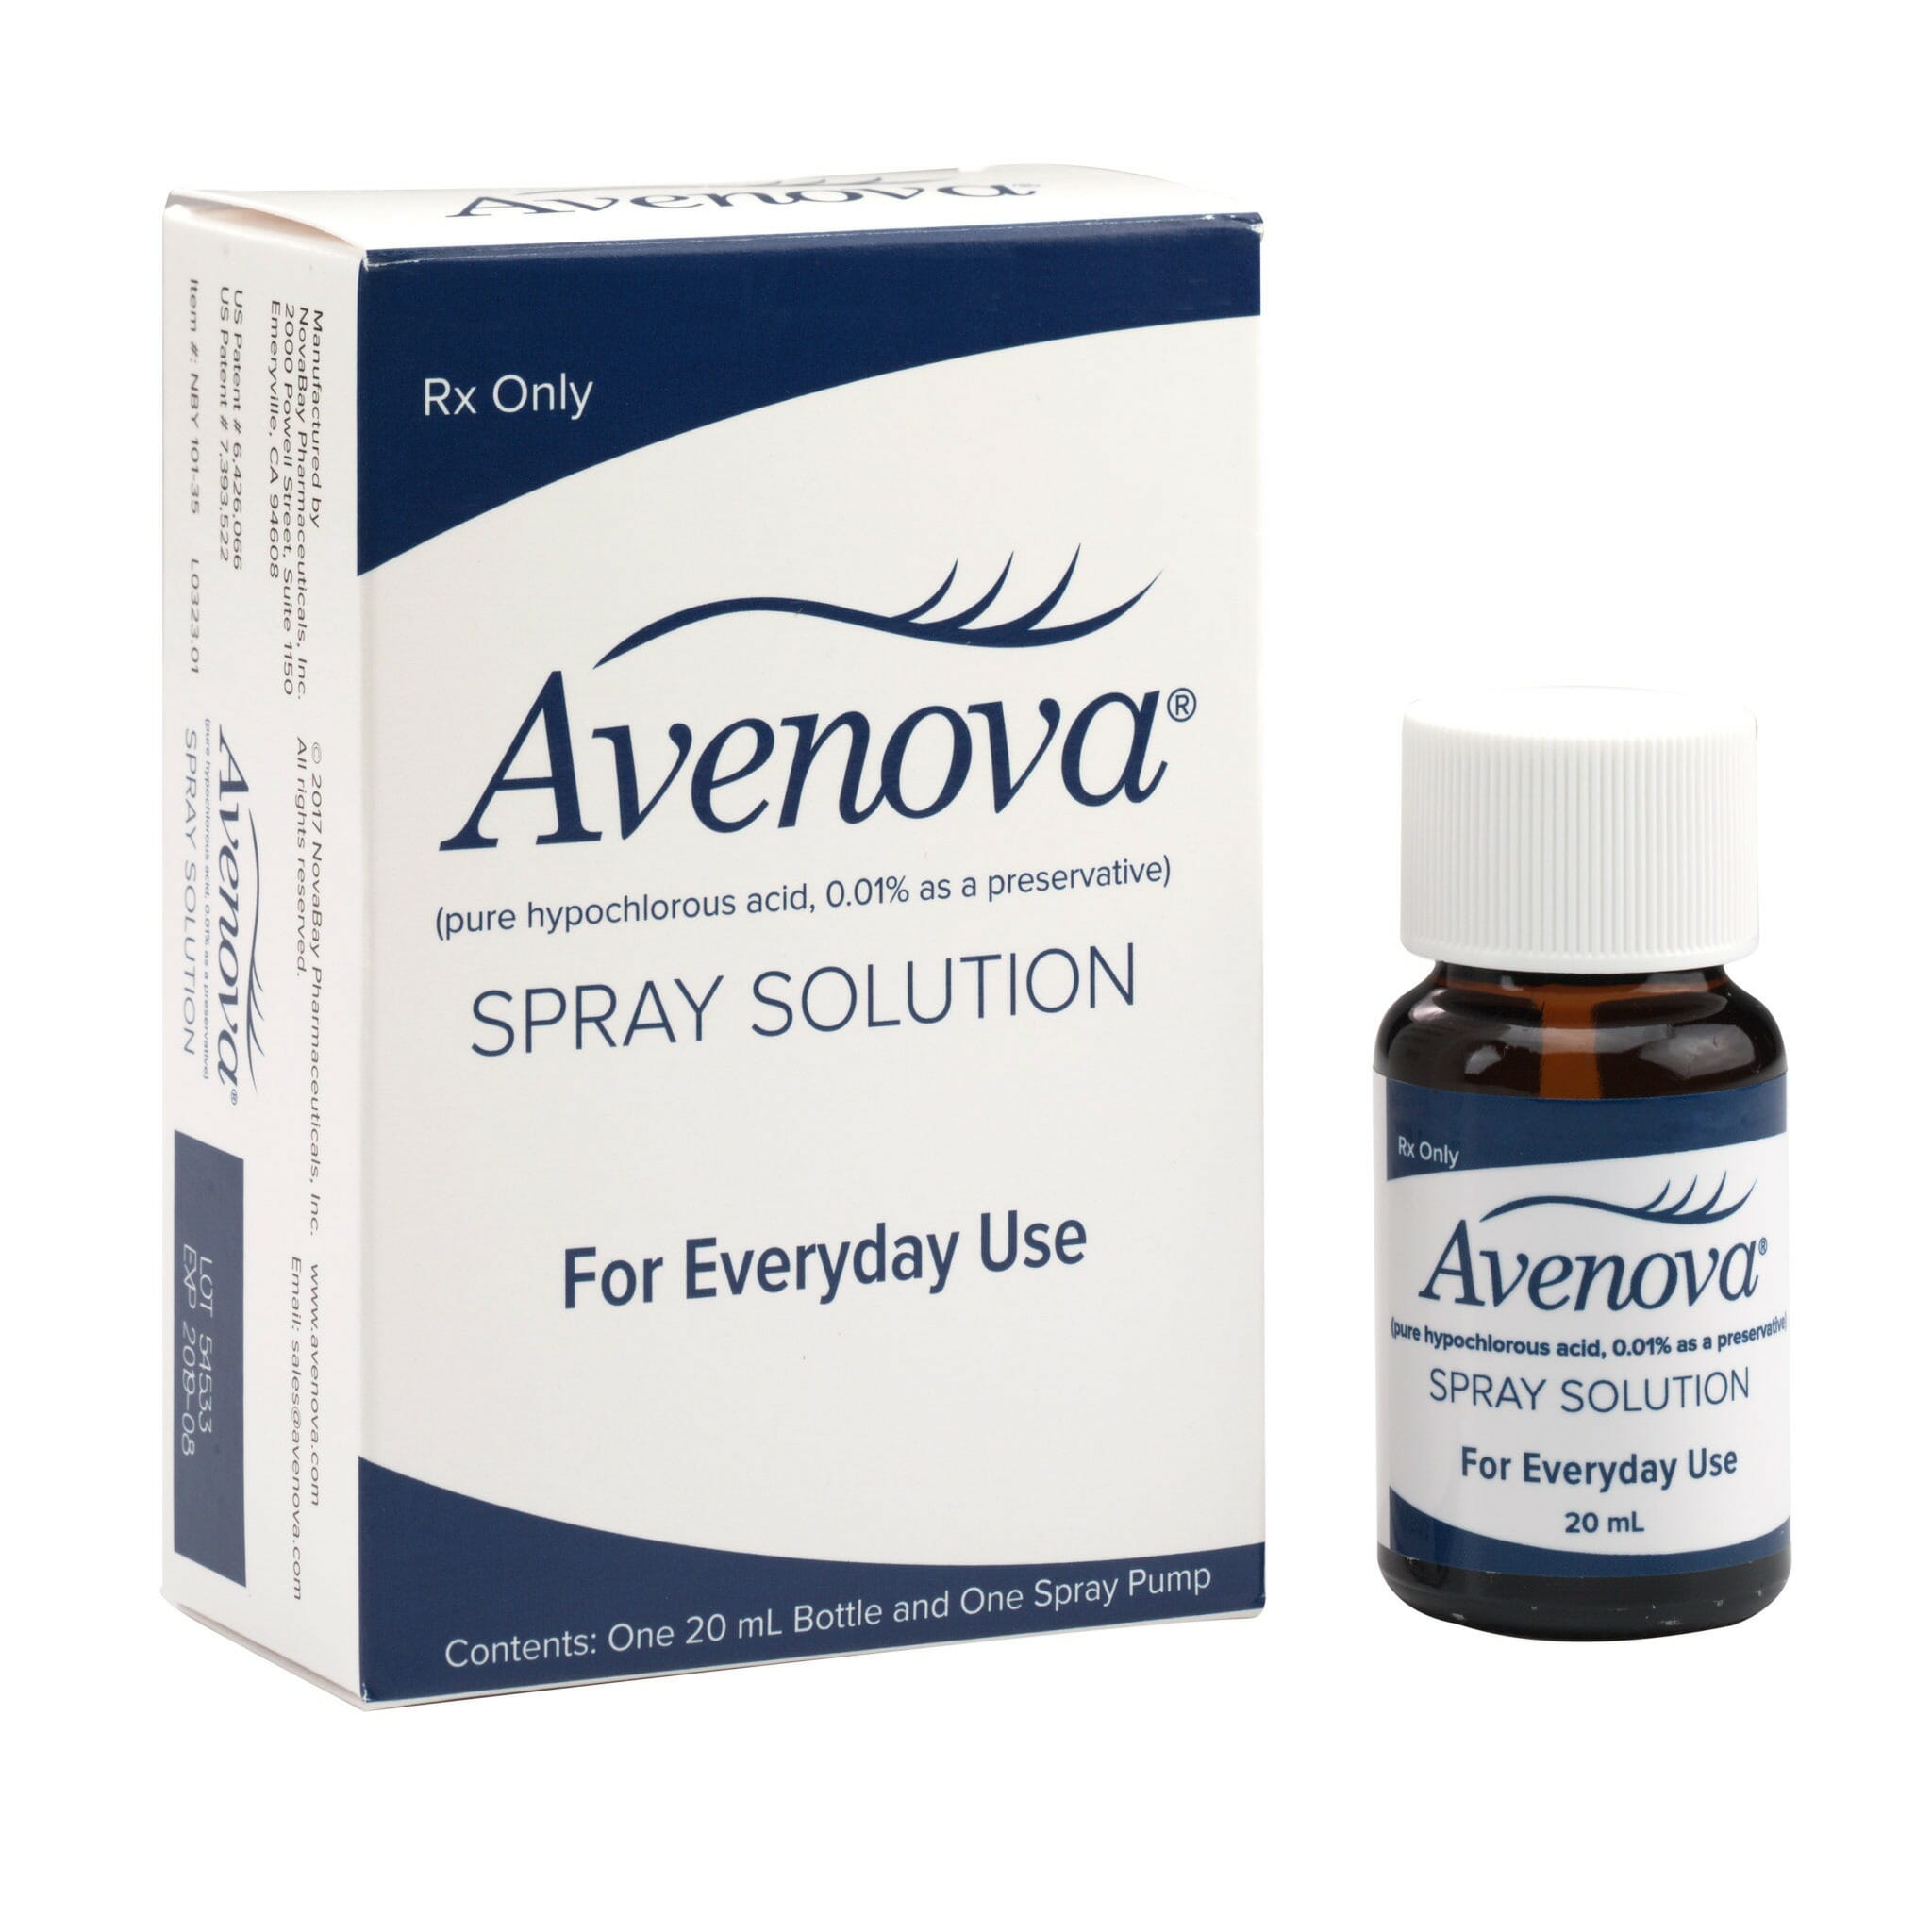 Before buying, can Avenova cleanser prevent serious eye conditions?